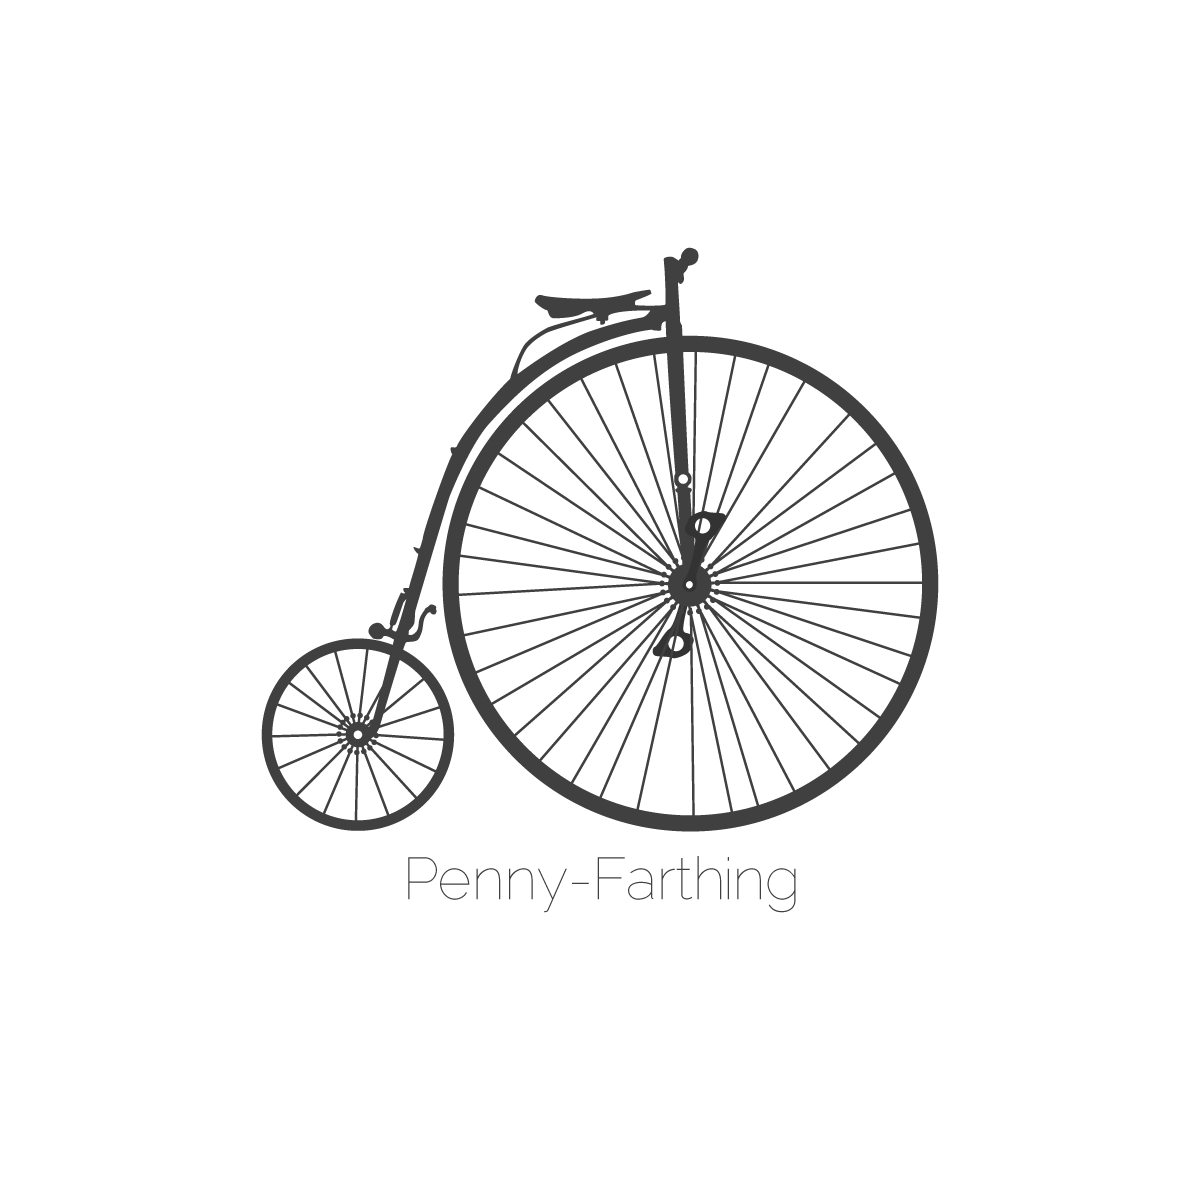 Vector Illustration of a penny farthing